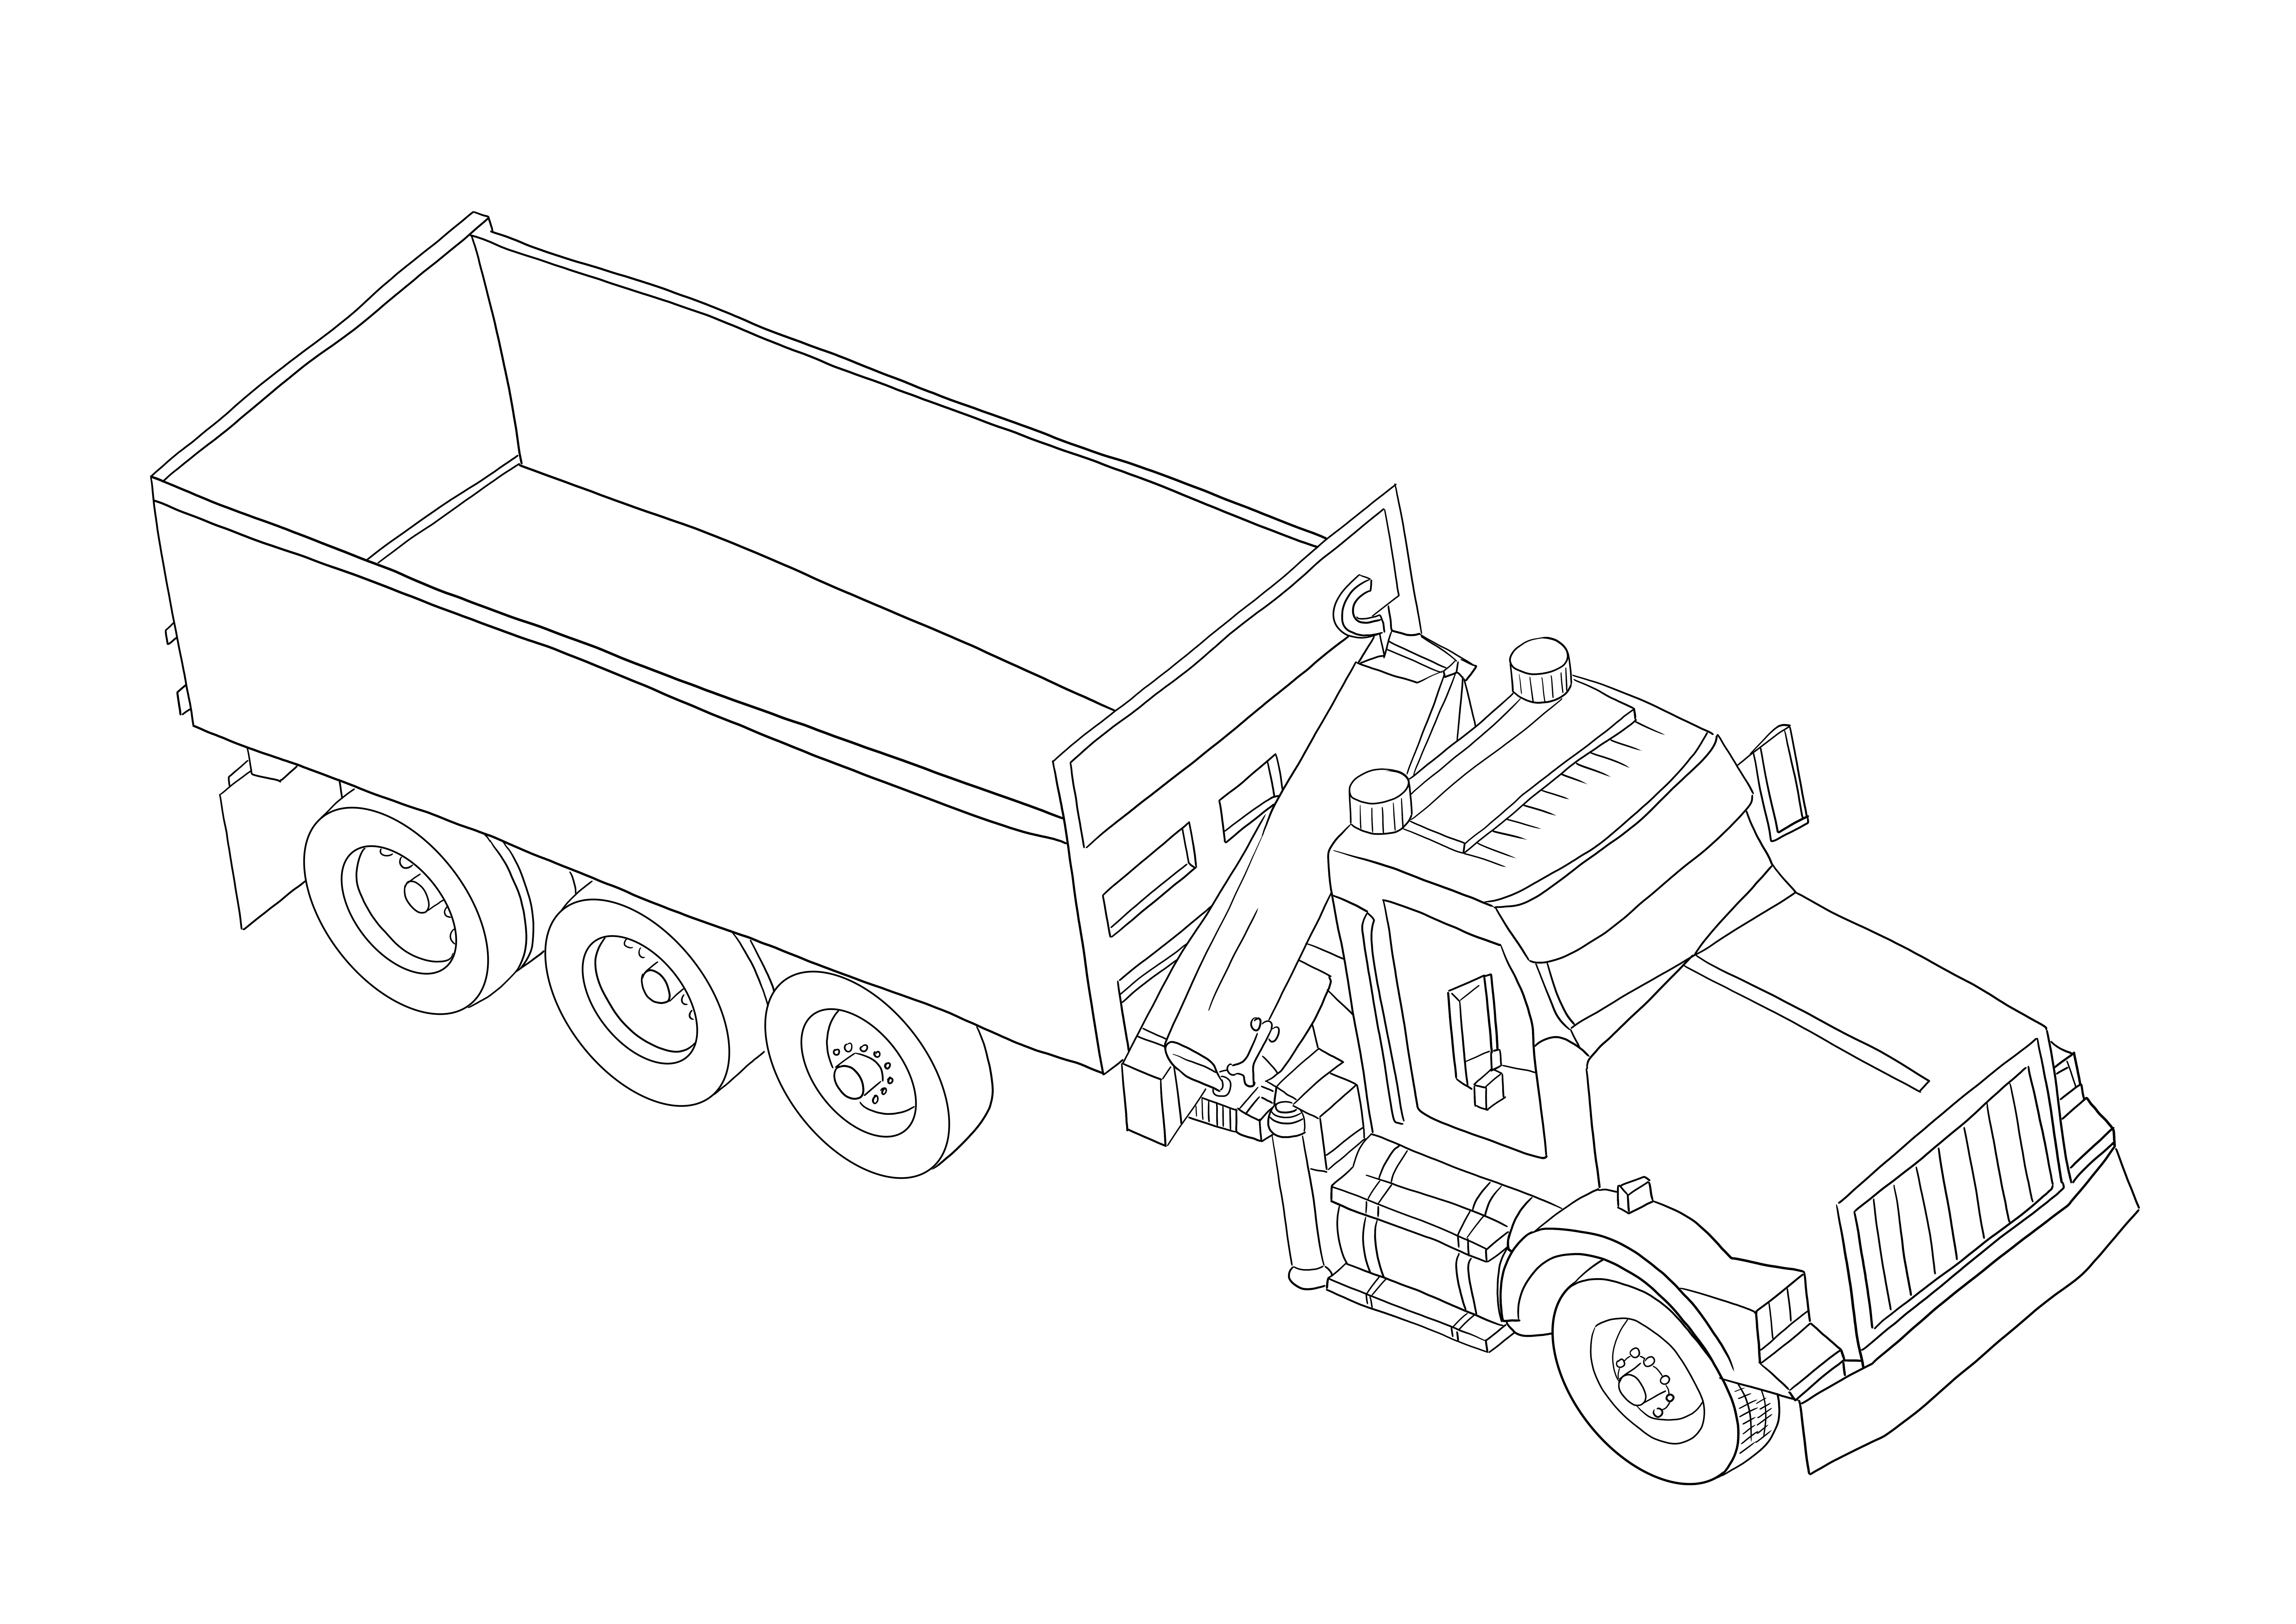 Here is our Pick-up truck ready to be printed for free and colored